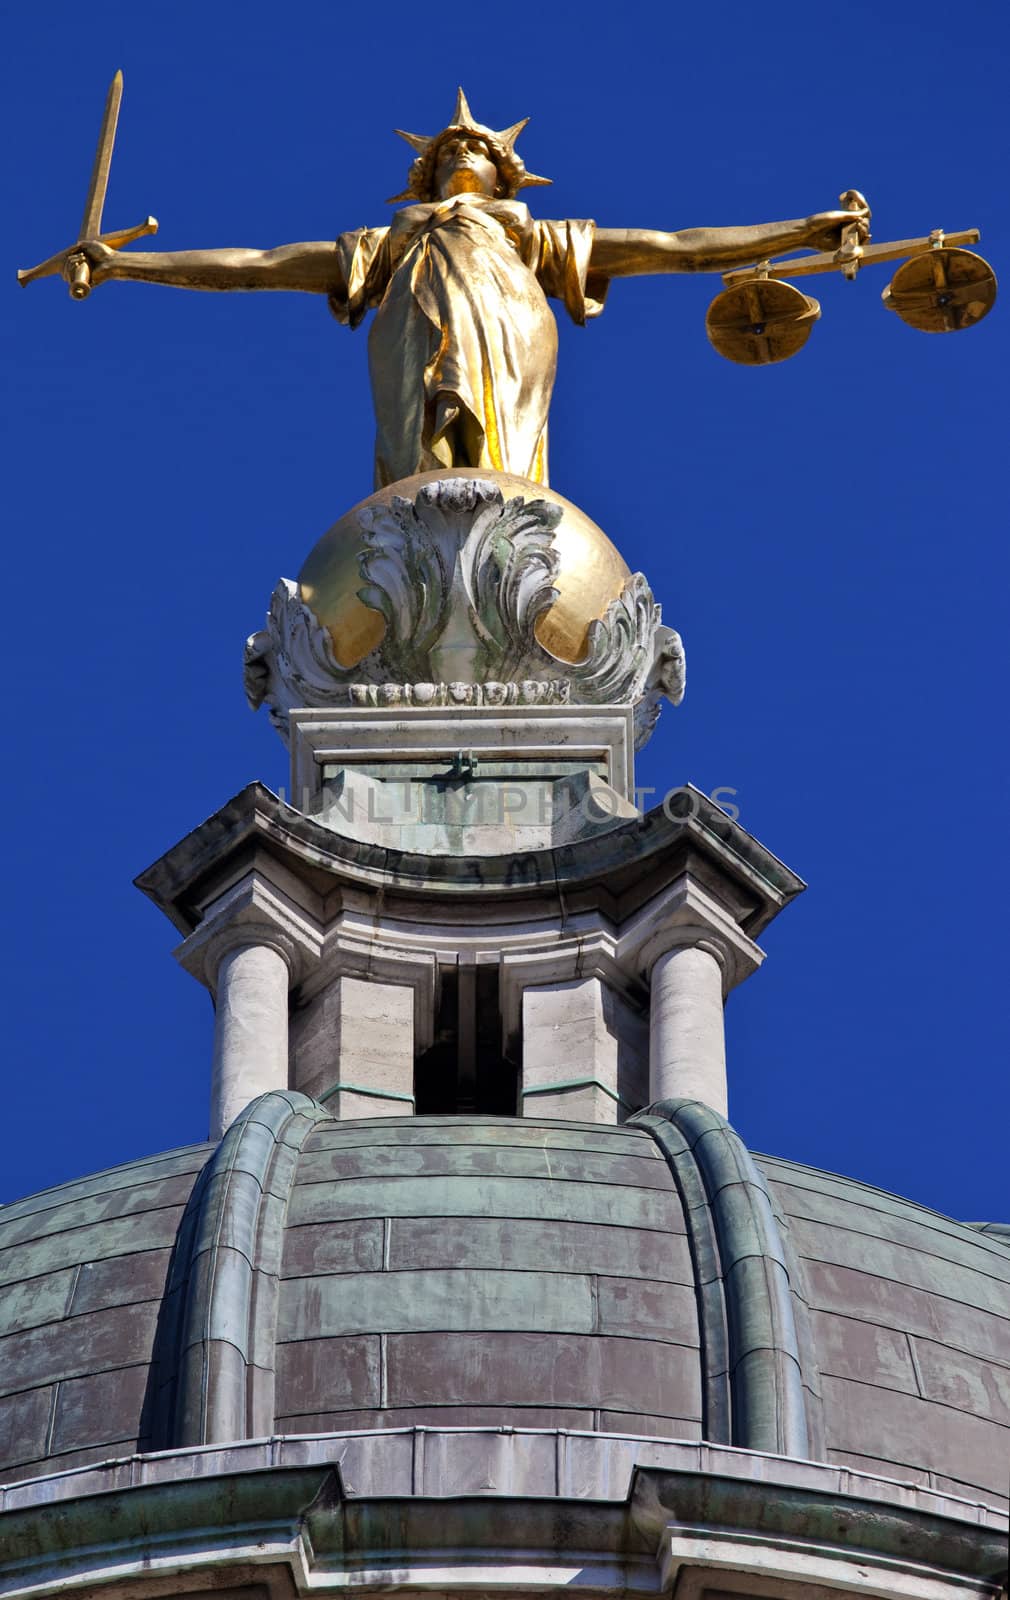 Lady Justice Statue ontop of the Old Bailey in London by chrisdorney